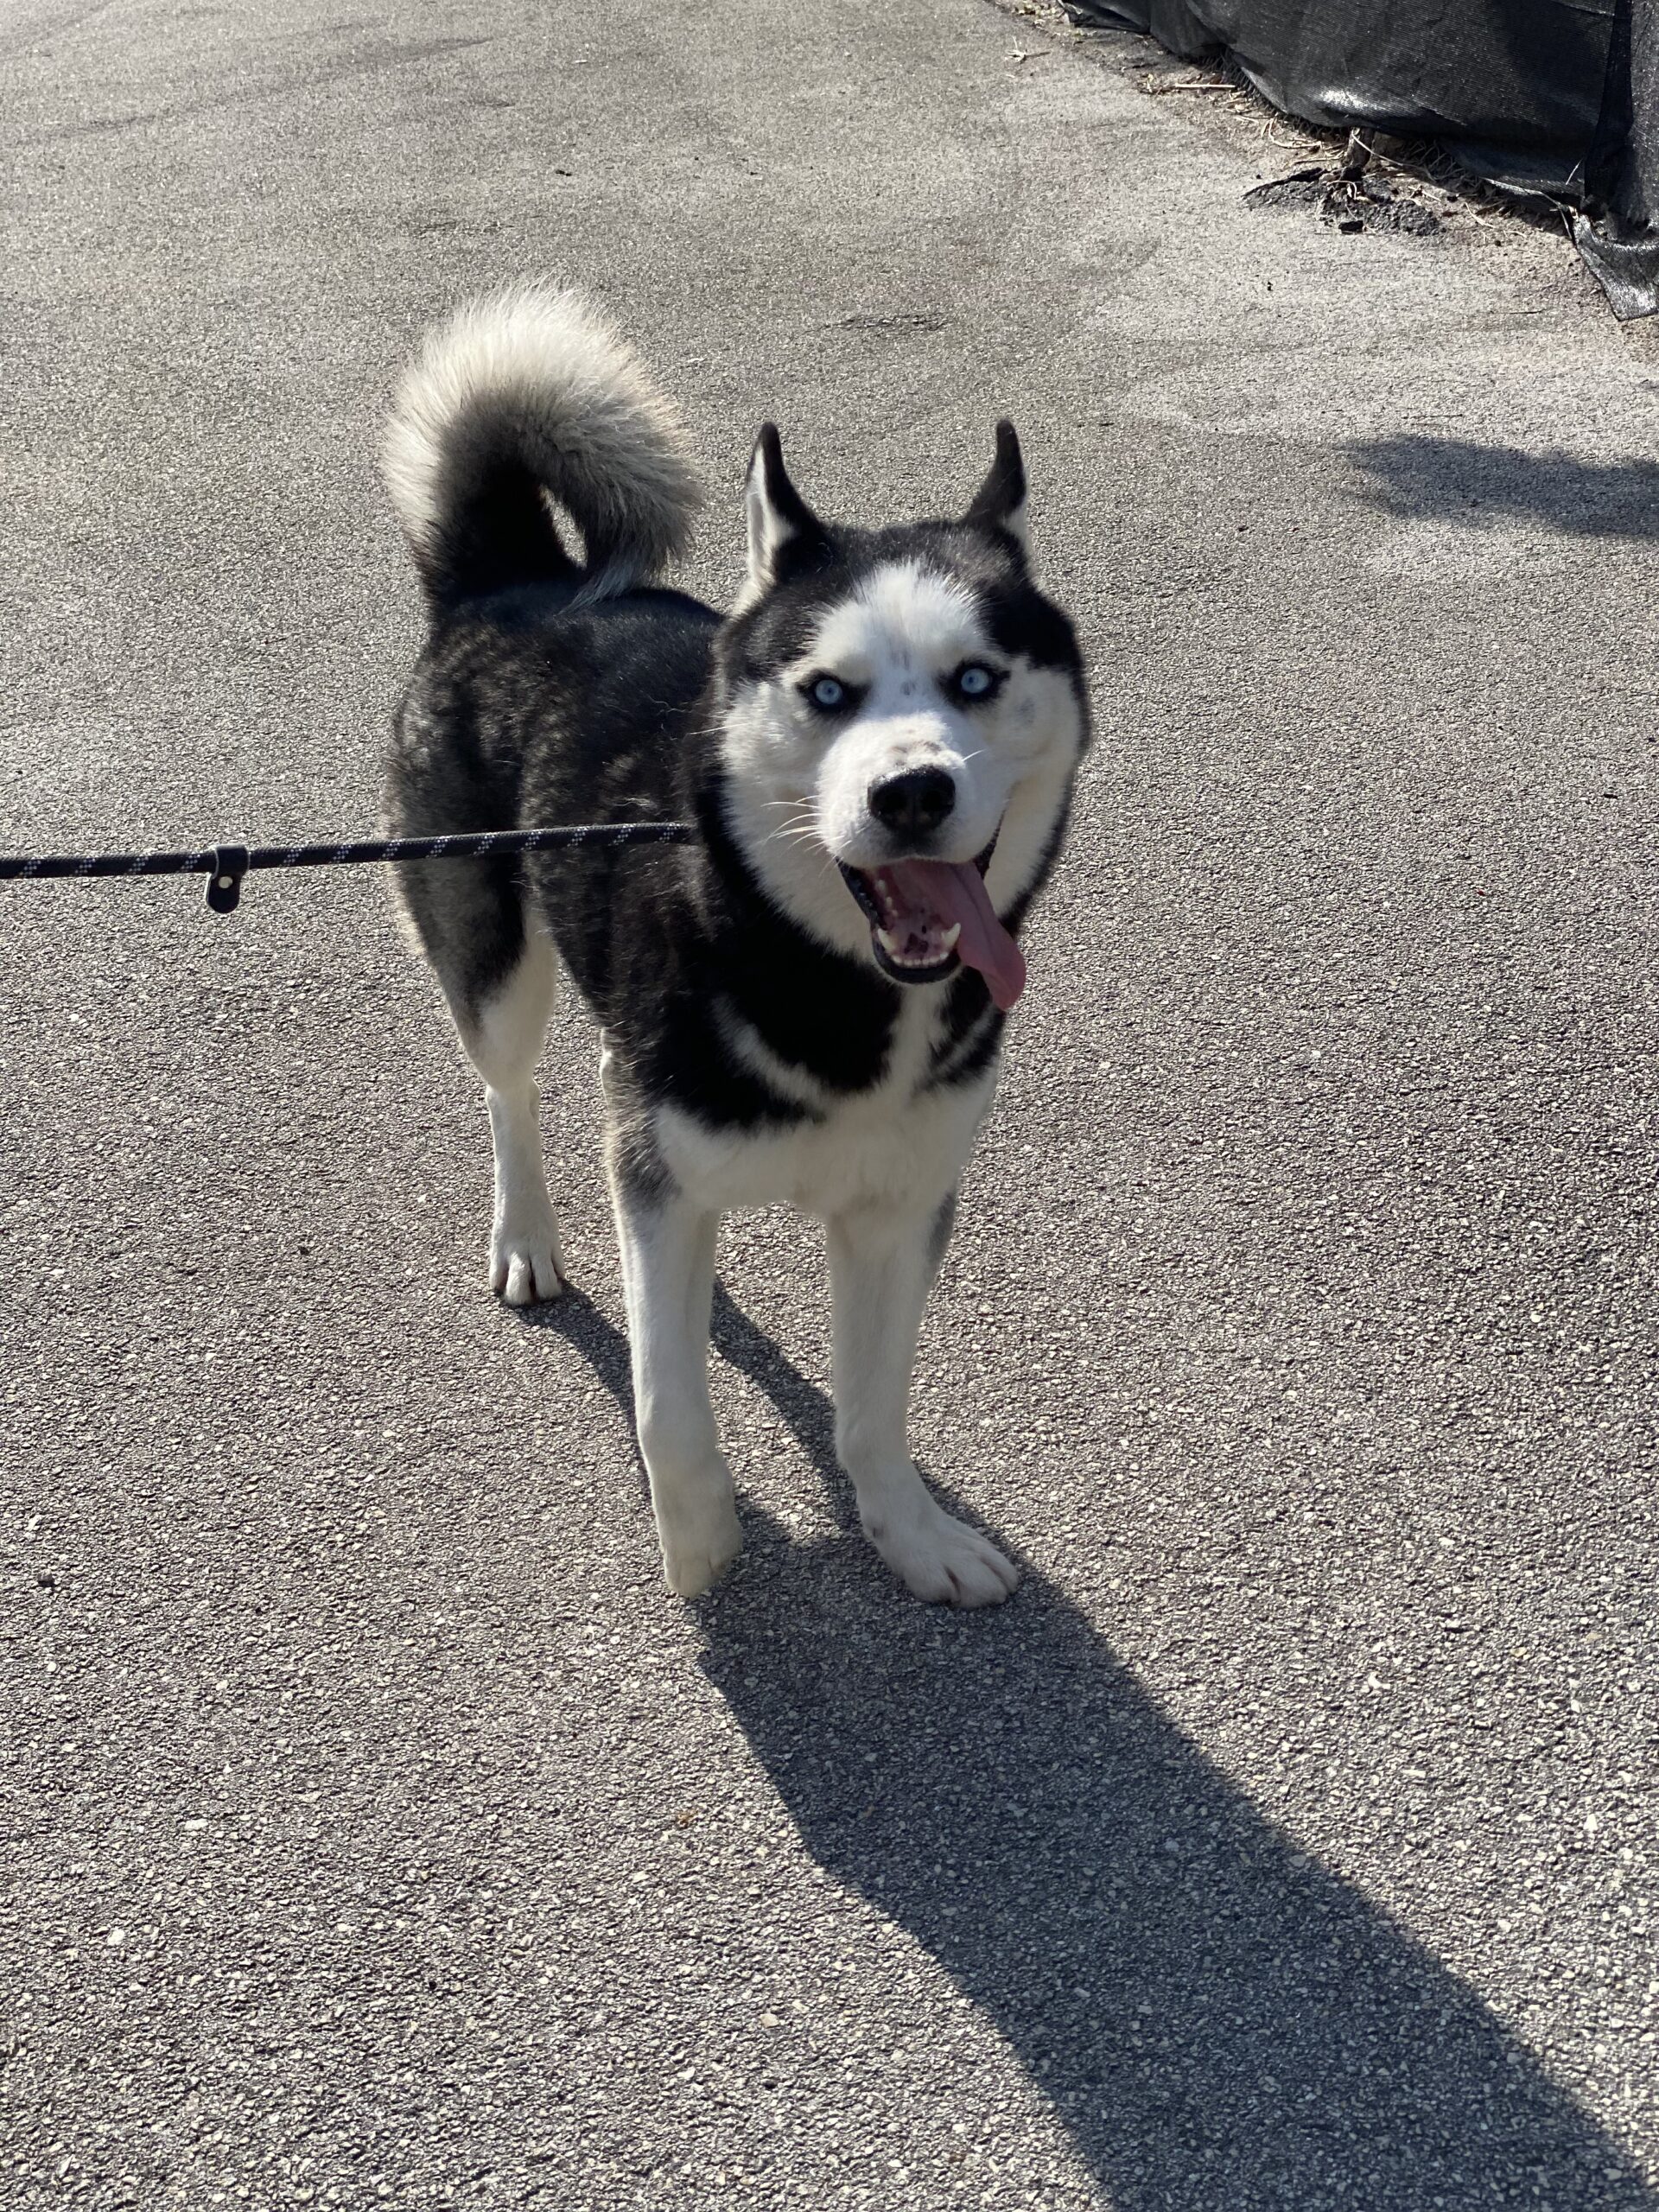 Titan is a 3 year old male Husky